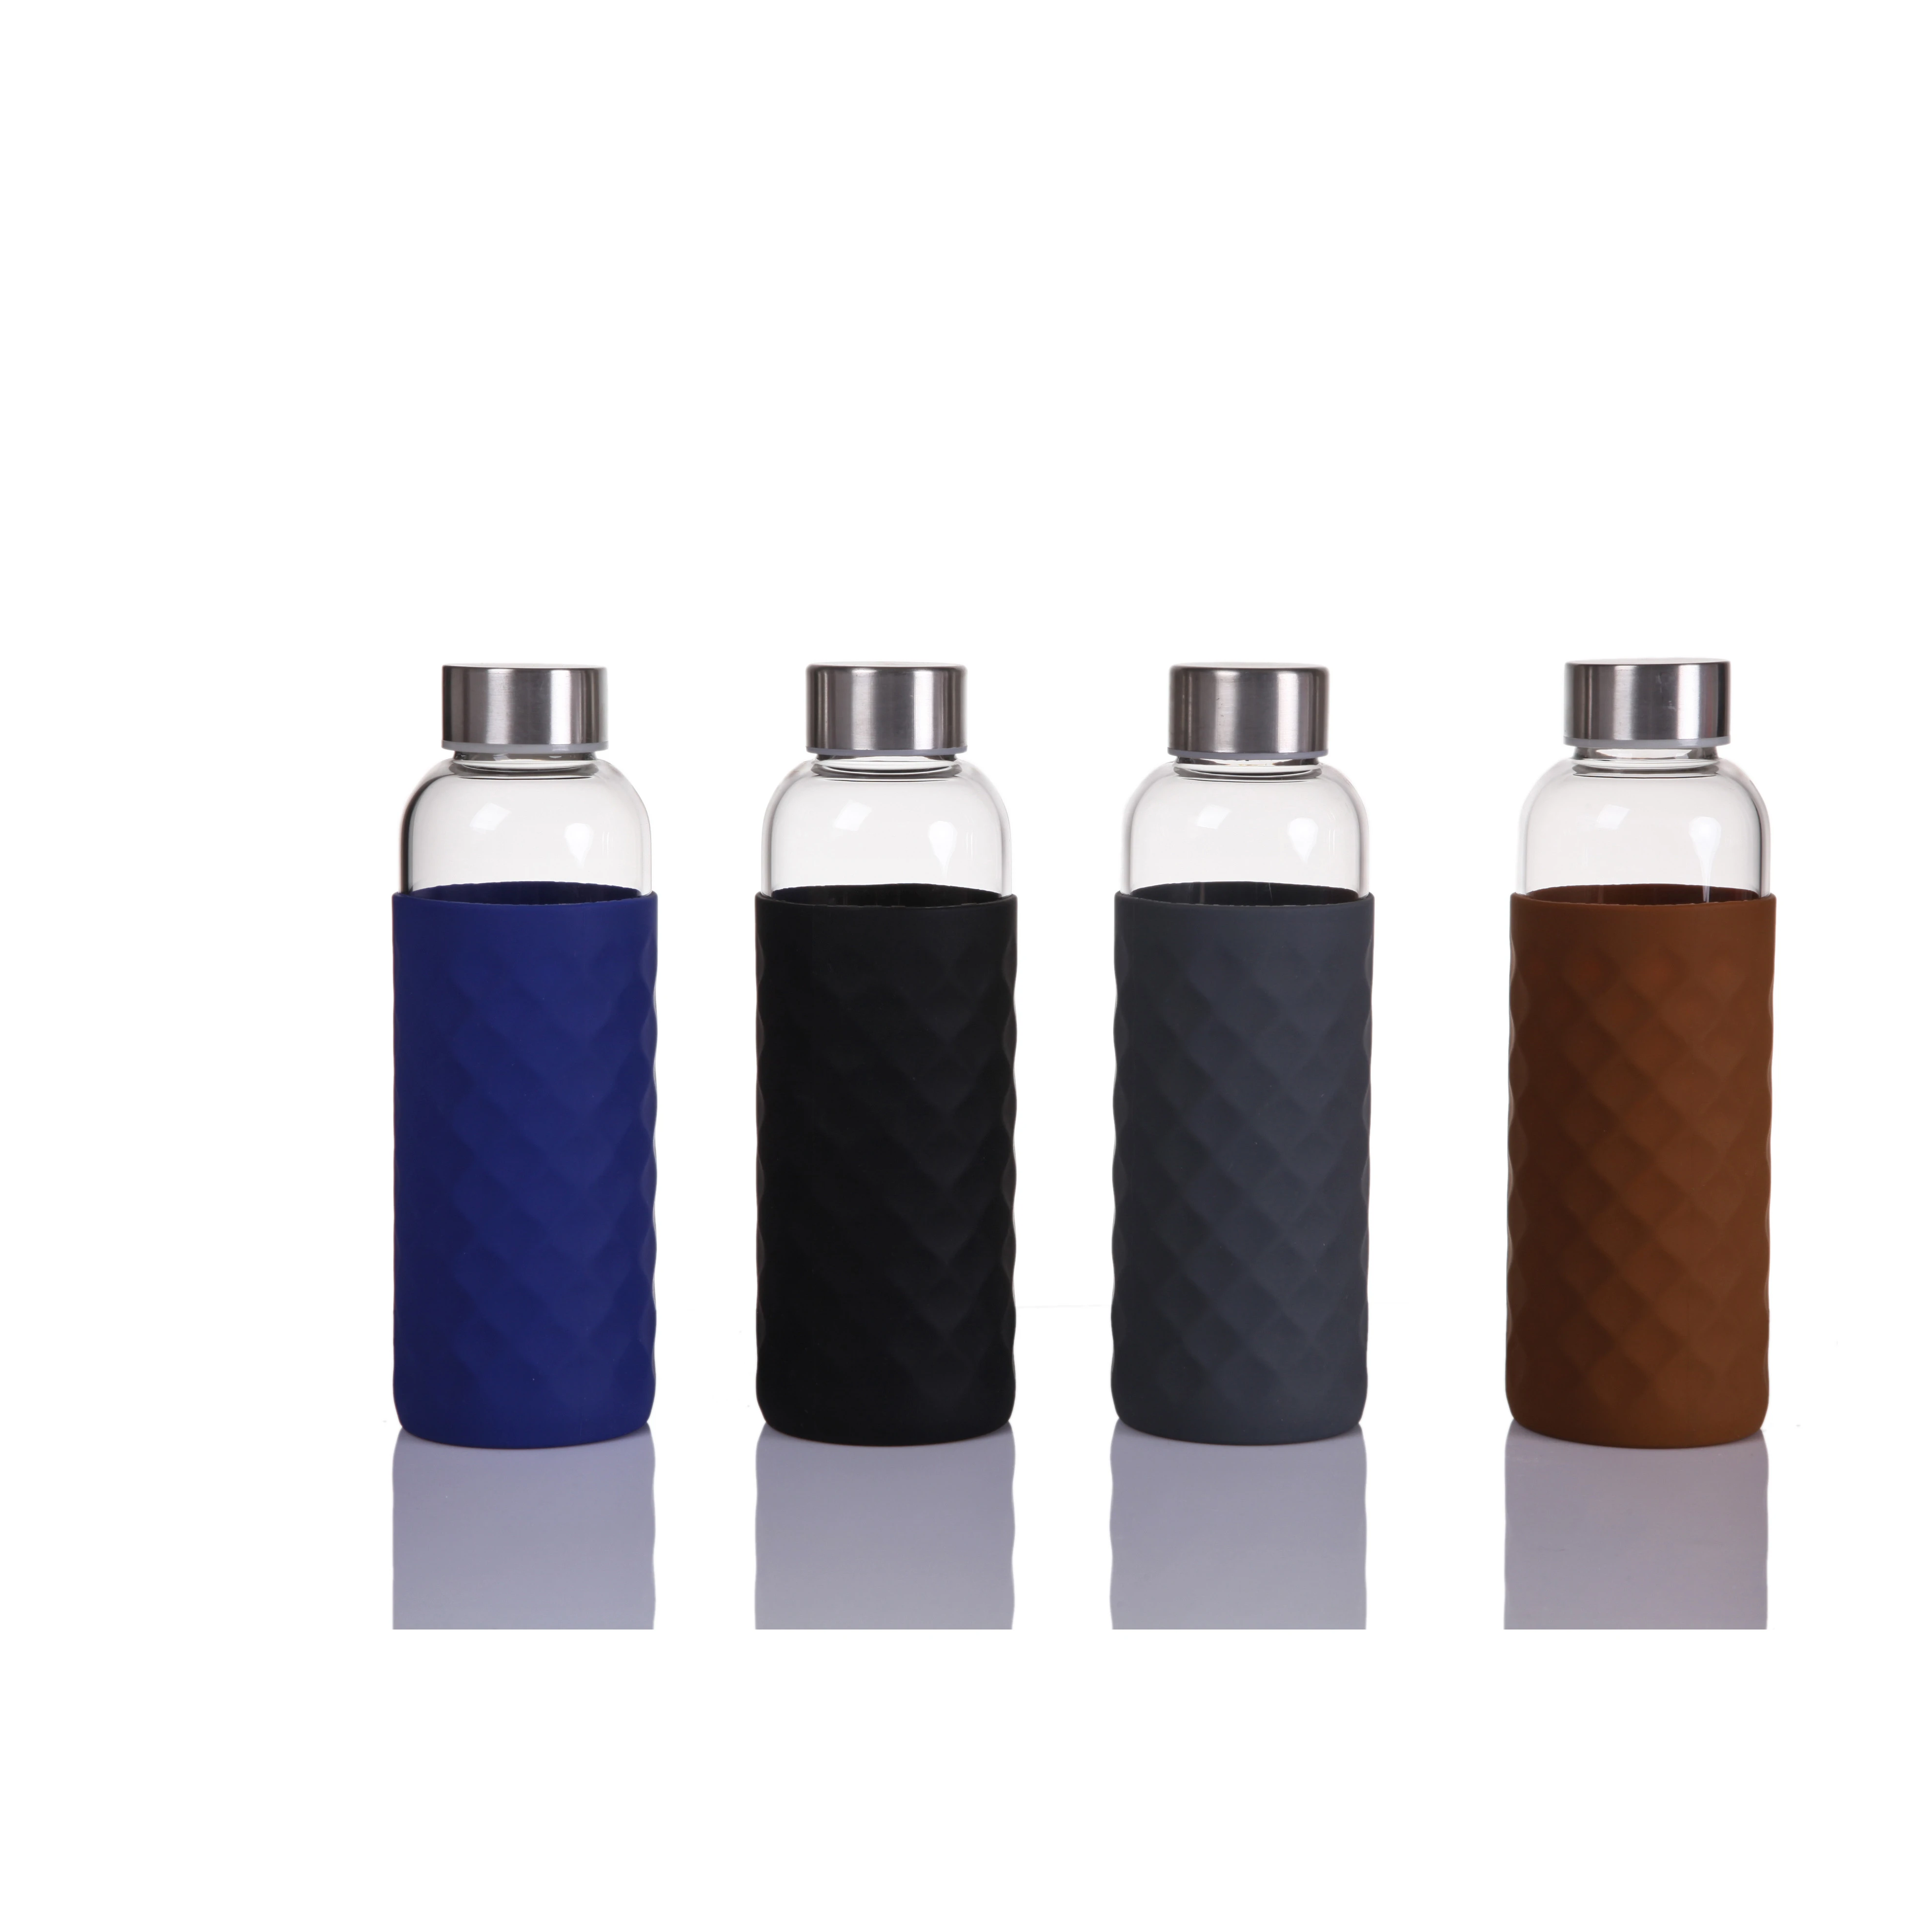 Quality colorful products ecologicos silicon glass water bottle with silicone sleeve